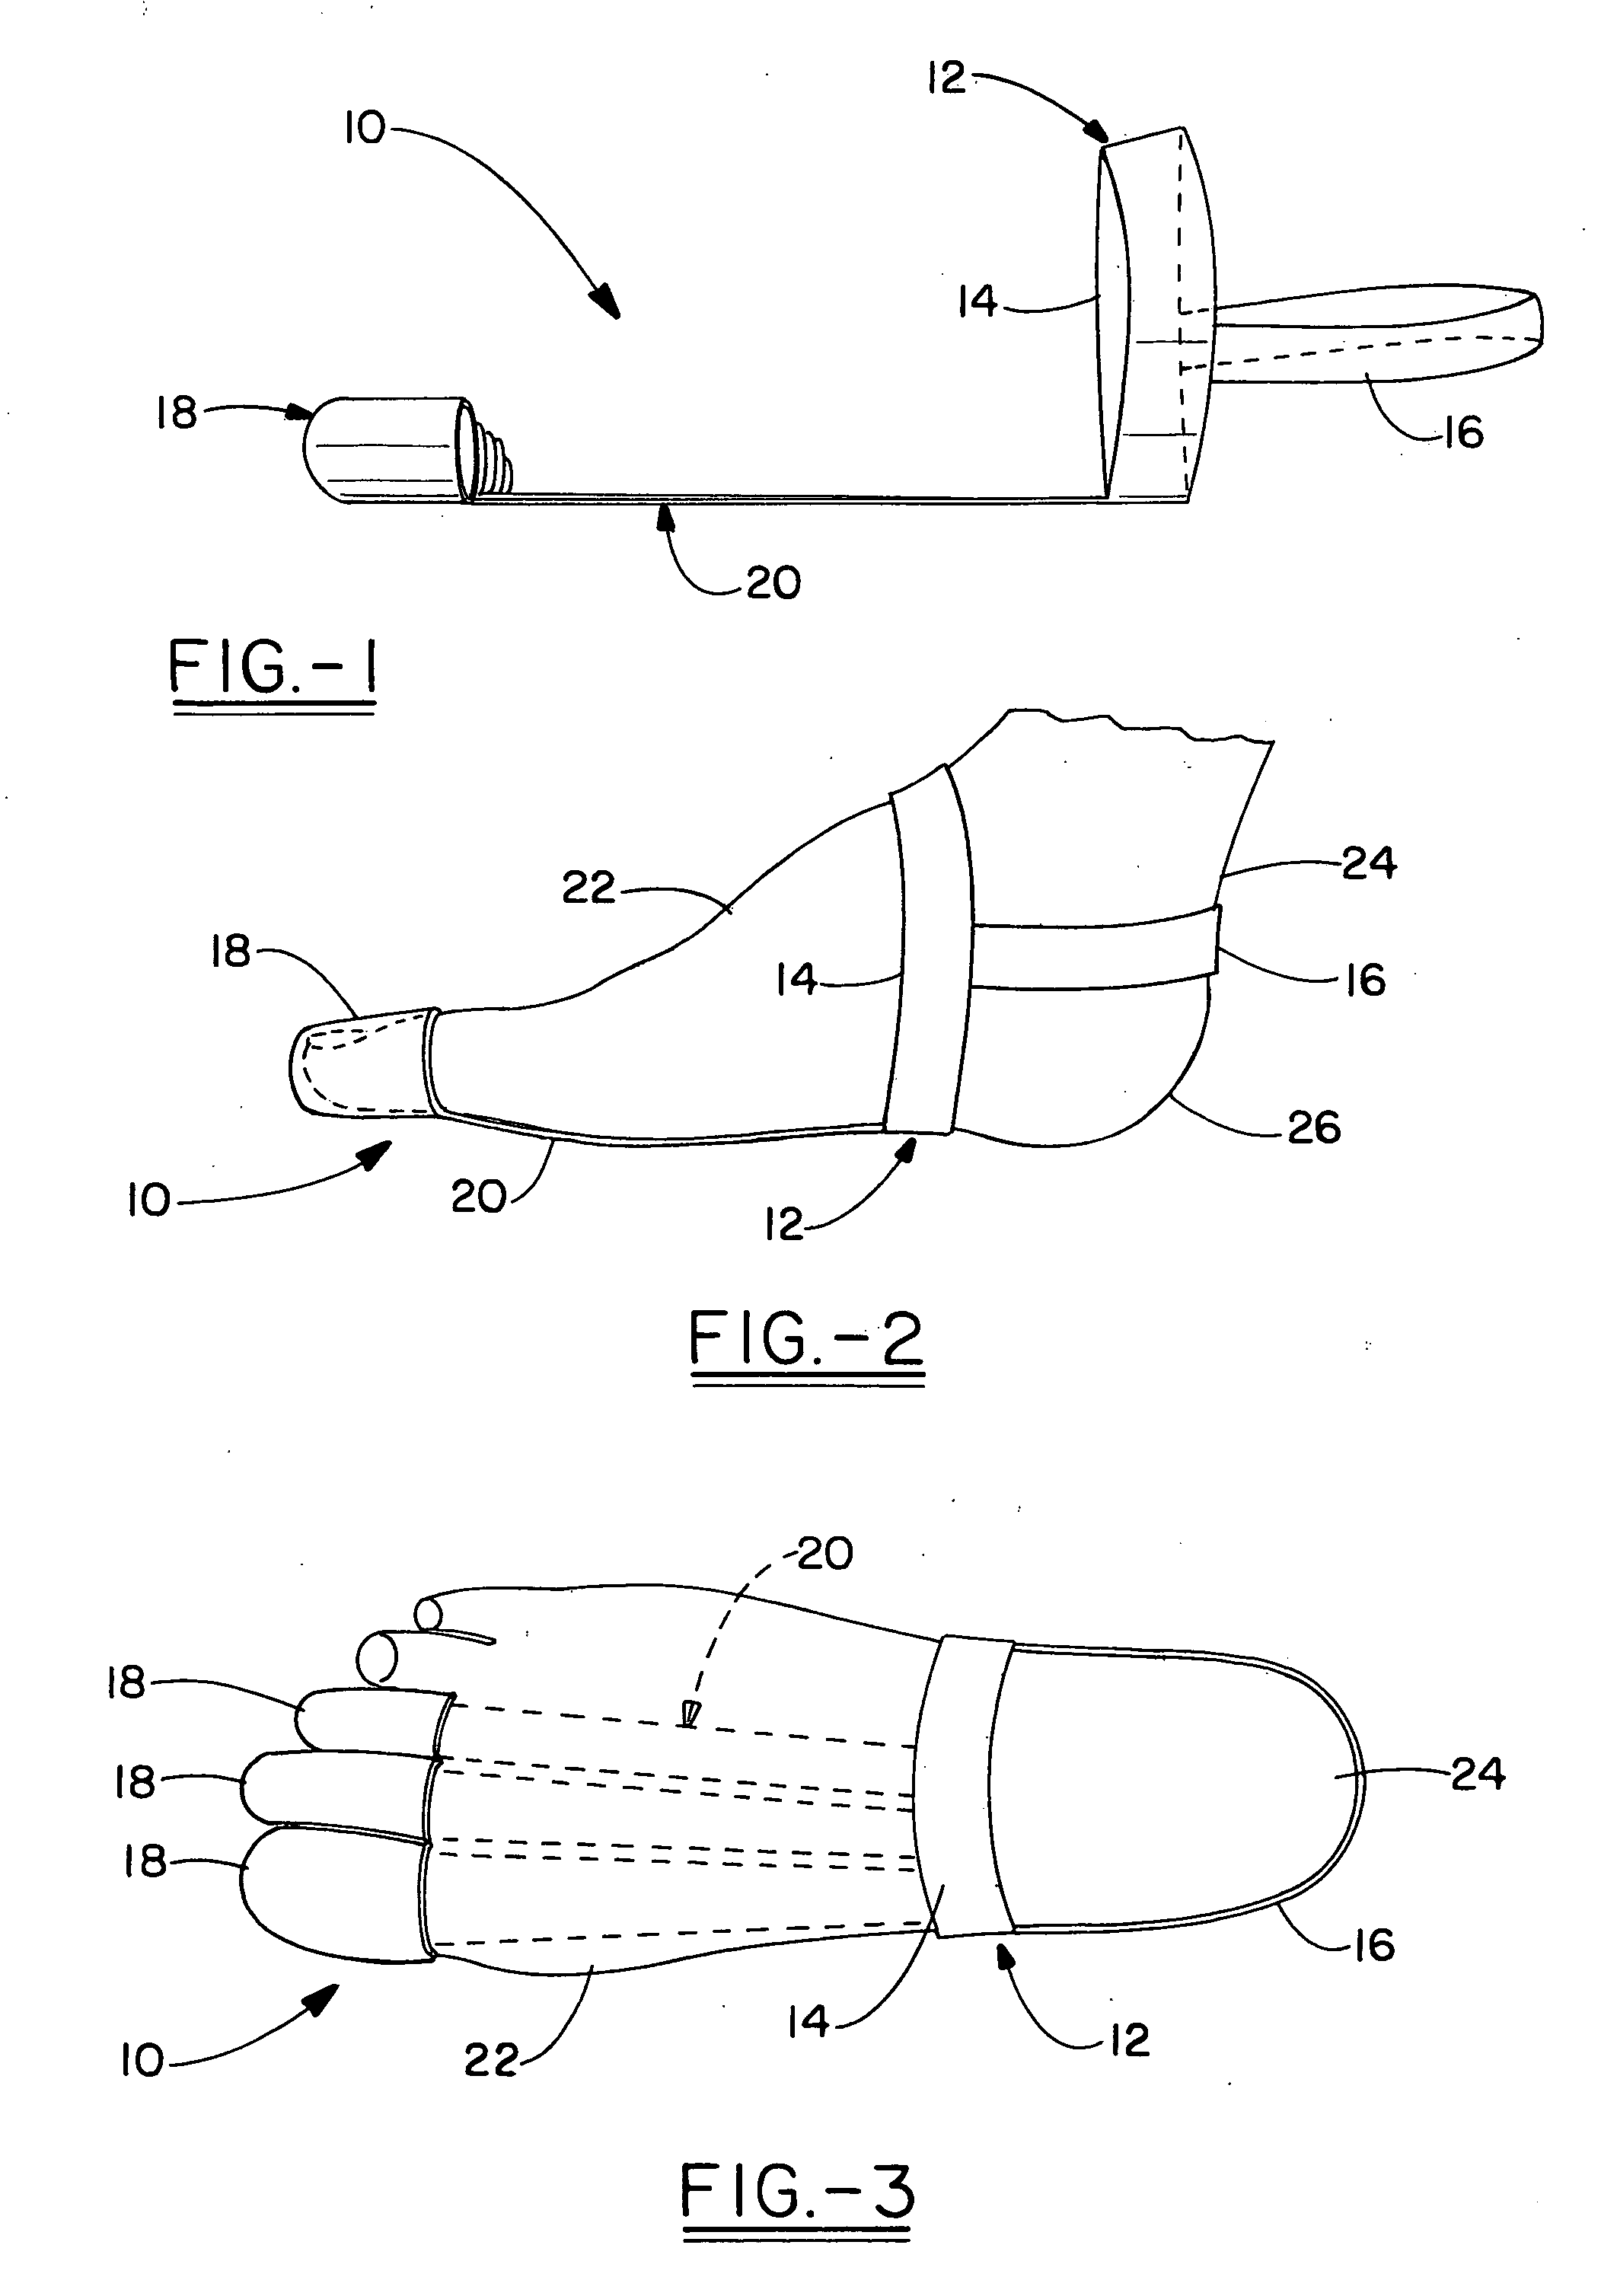 Therapeutic foot appliance and method of use